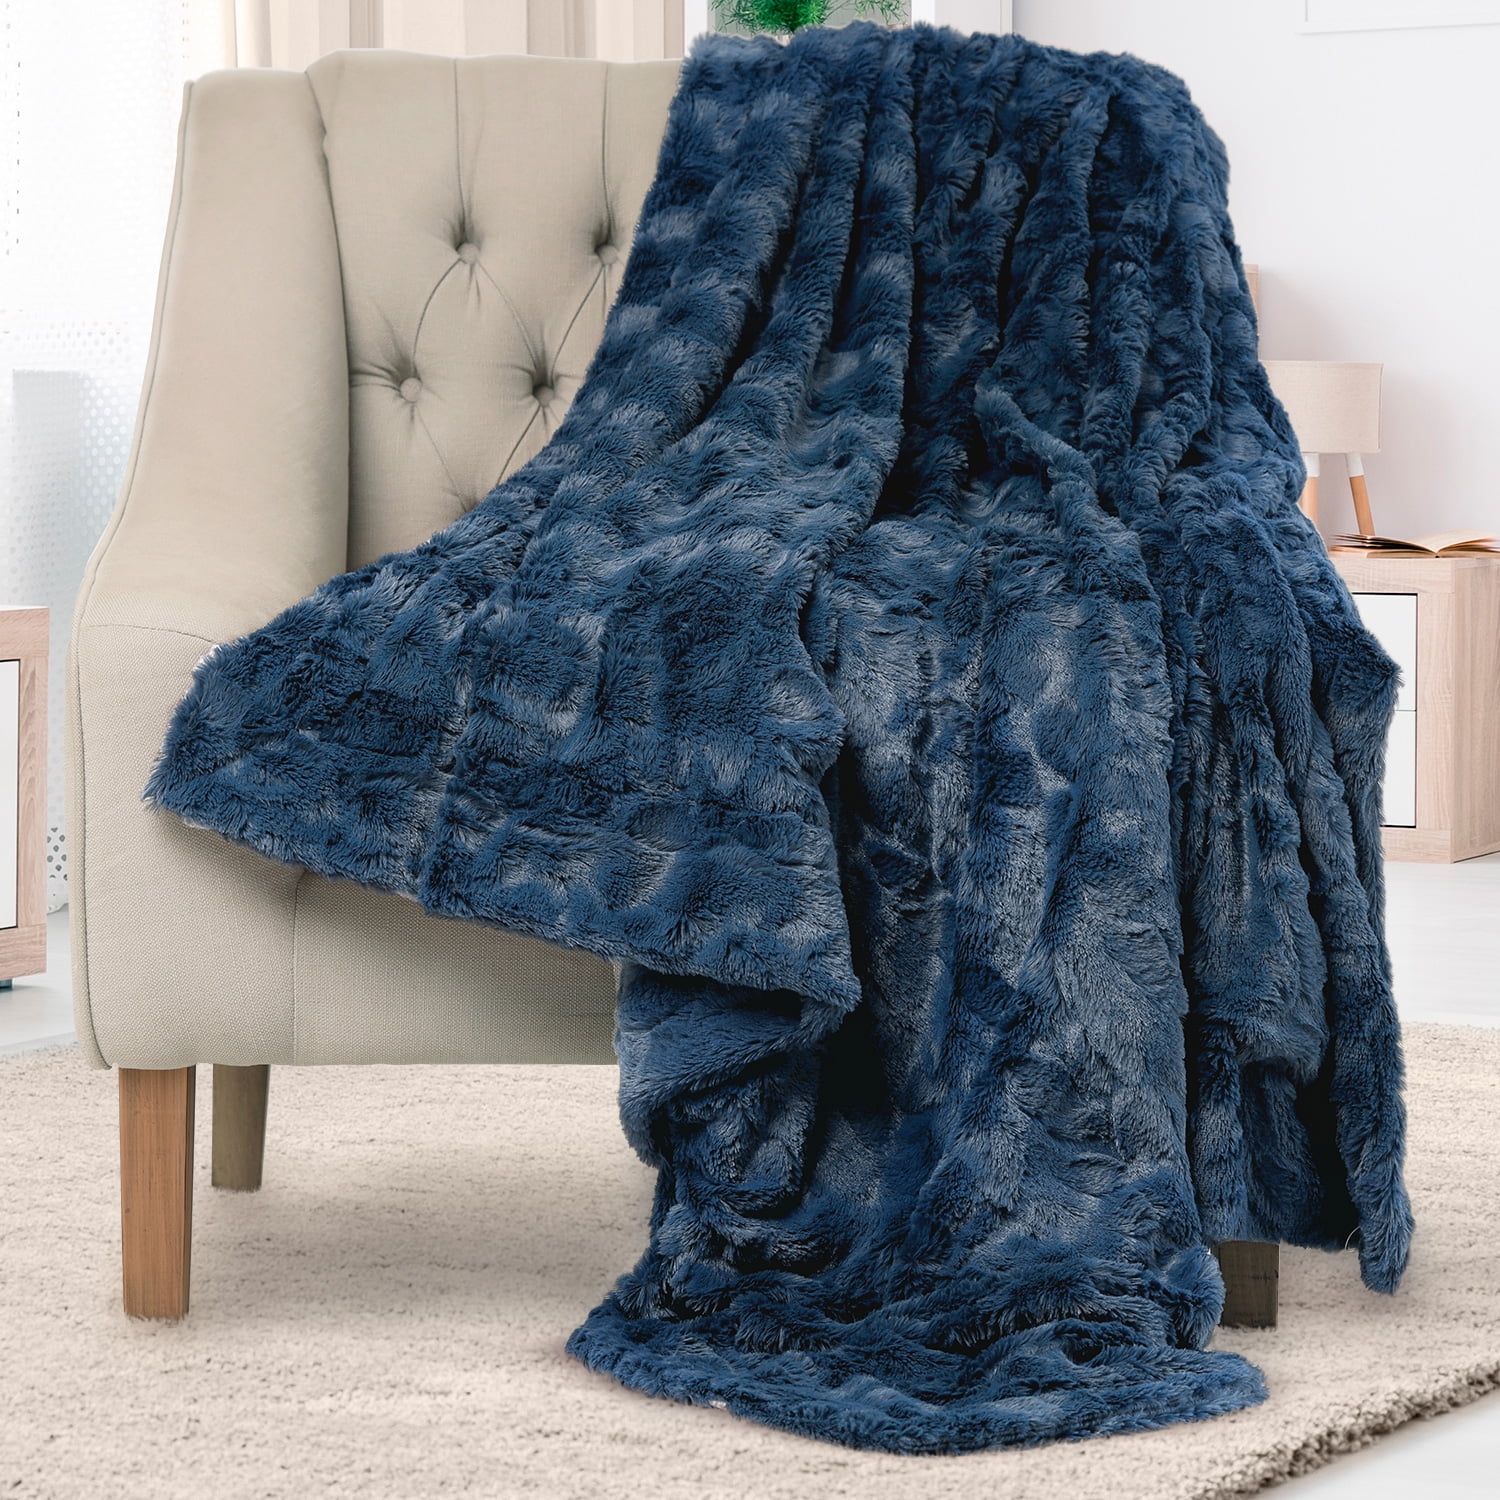 ULTRA SOFT ULTIMATE PLUSH LUXURY WARM MODERN COMFORT BLANKET ALL SIZES COLORS 